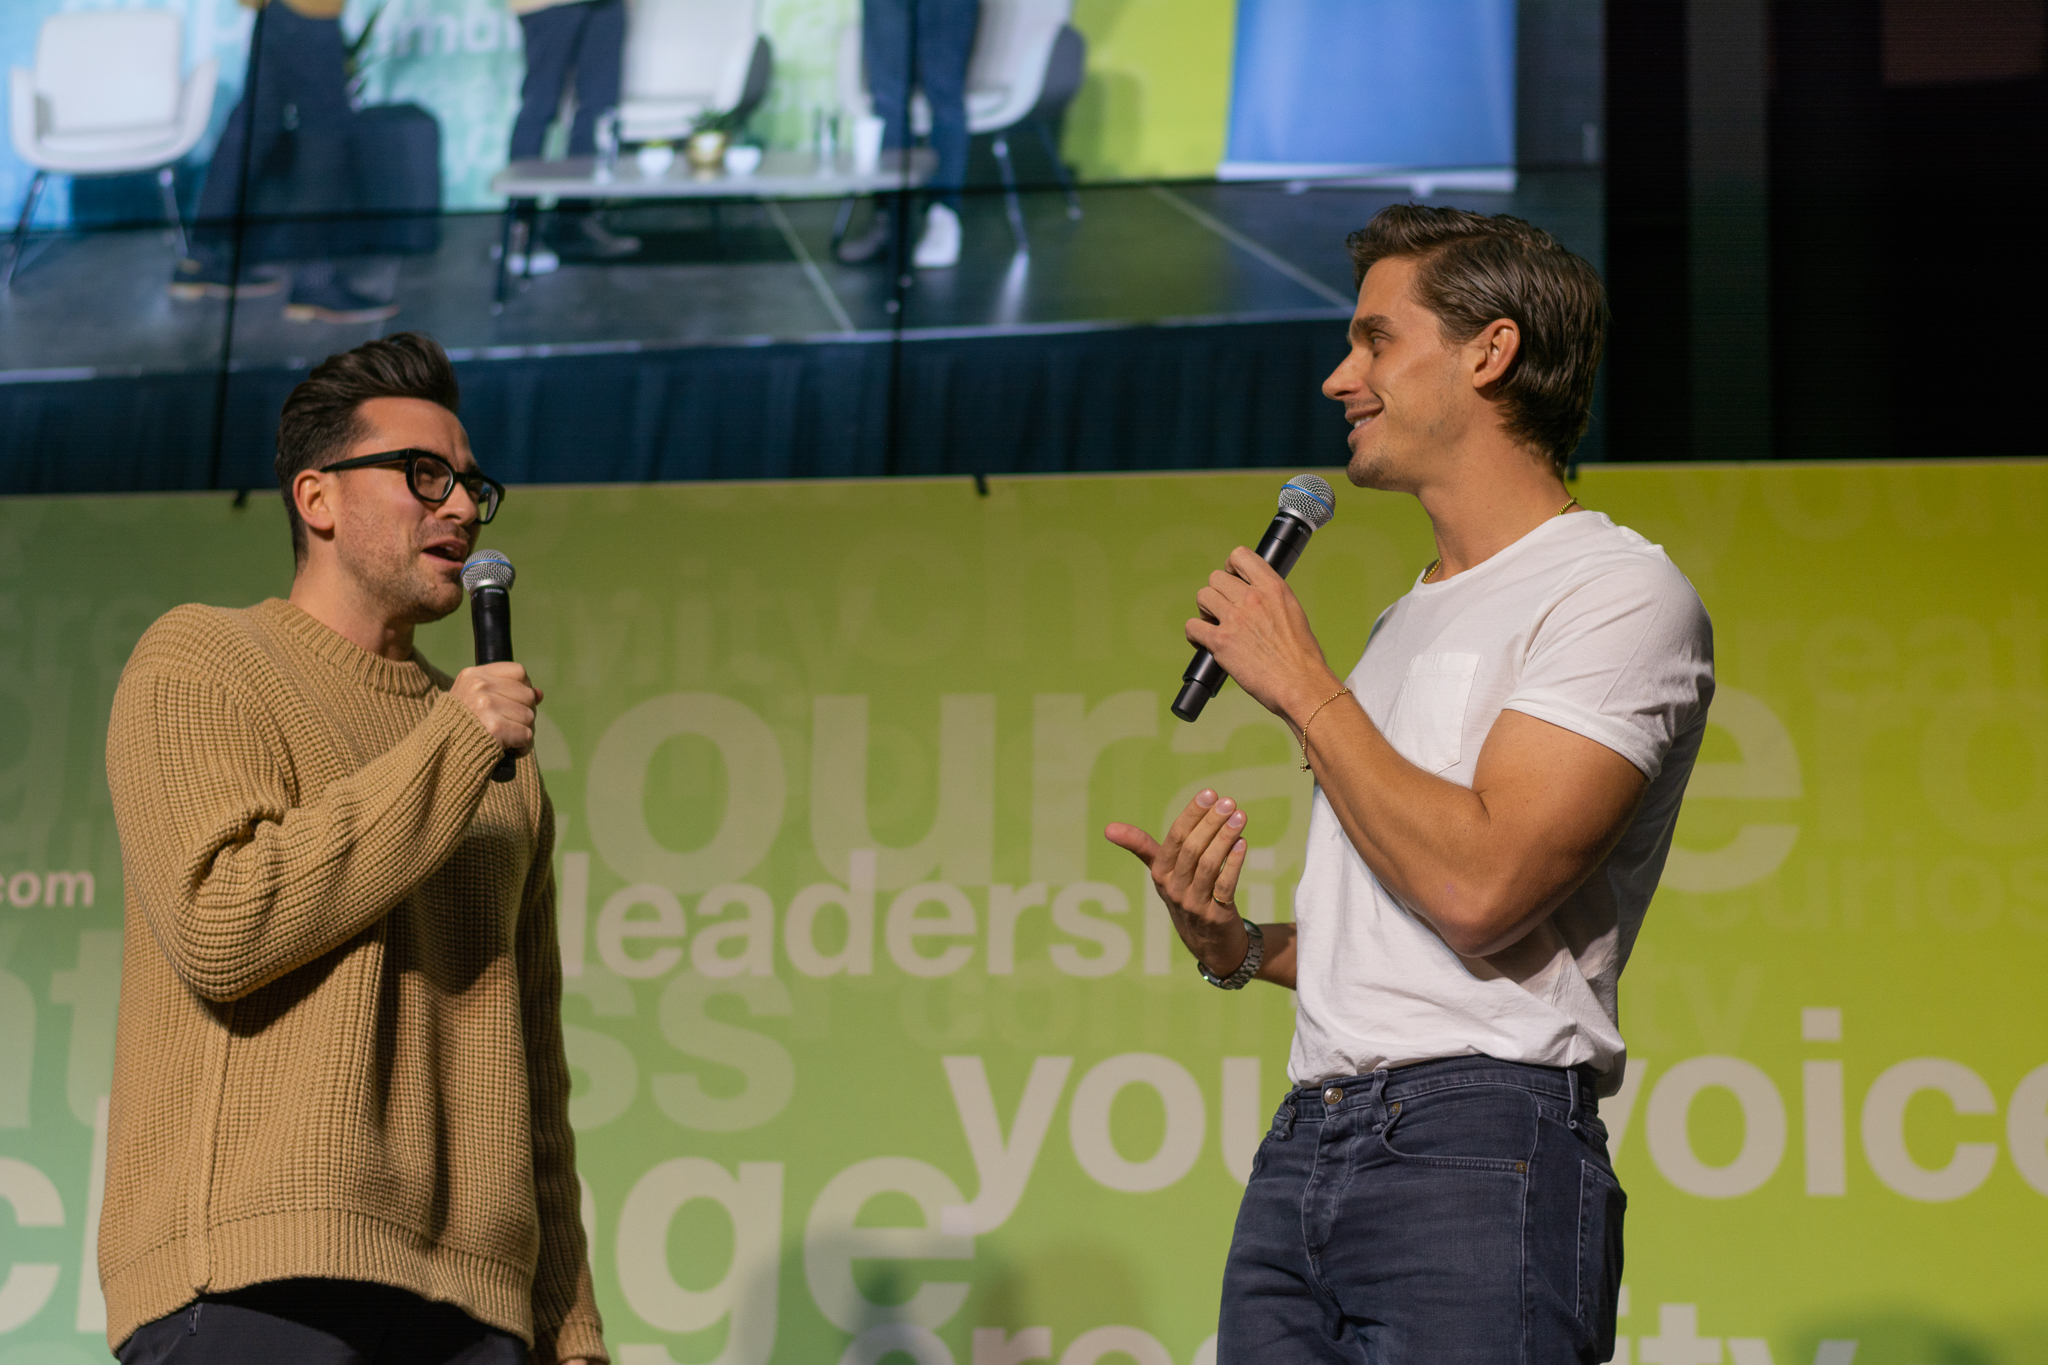 Dan Levy and Antoni Porowski chat on stage